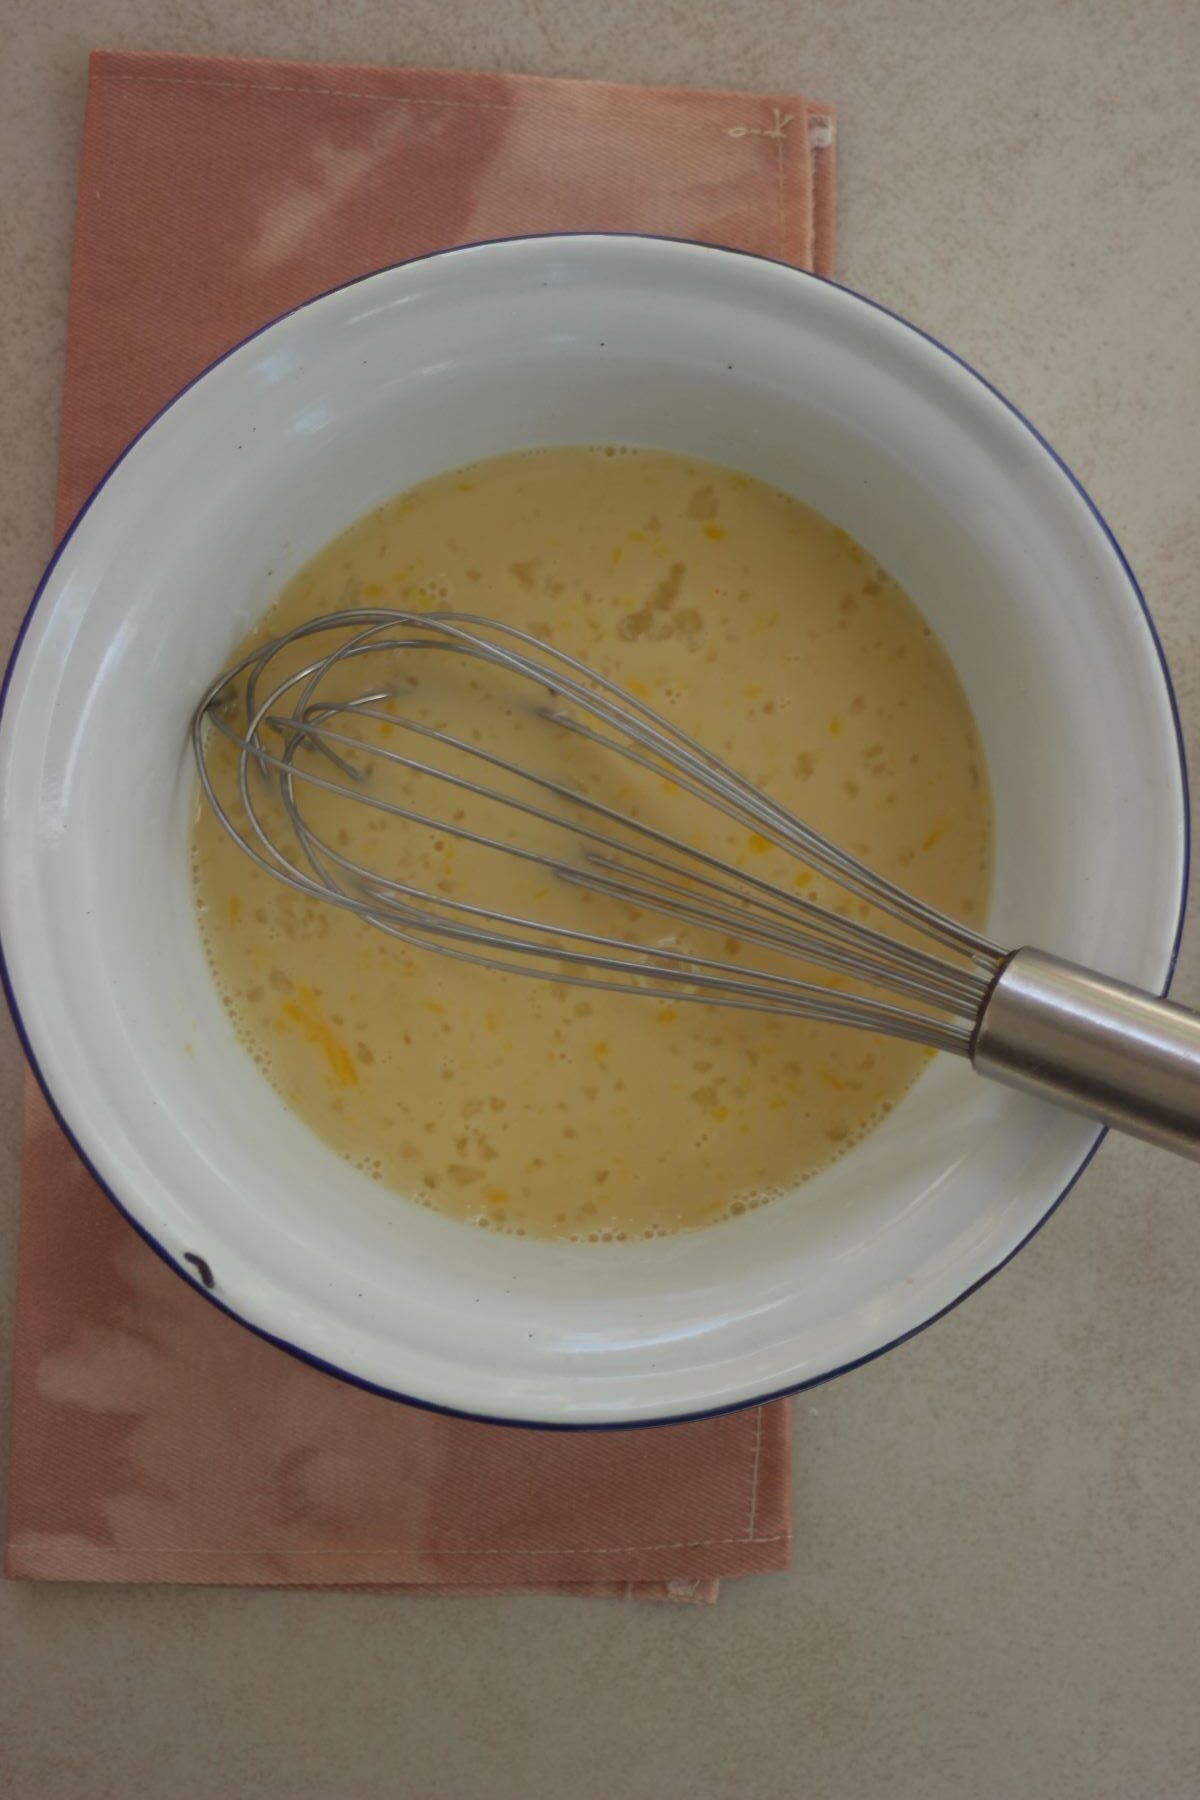 A bowl with a yellow liquid and a hand whisk.